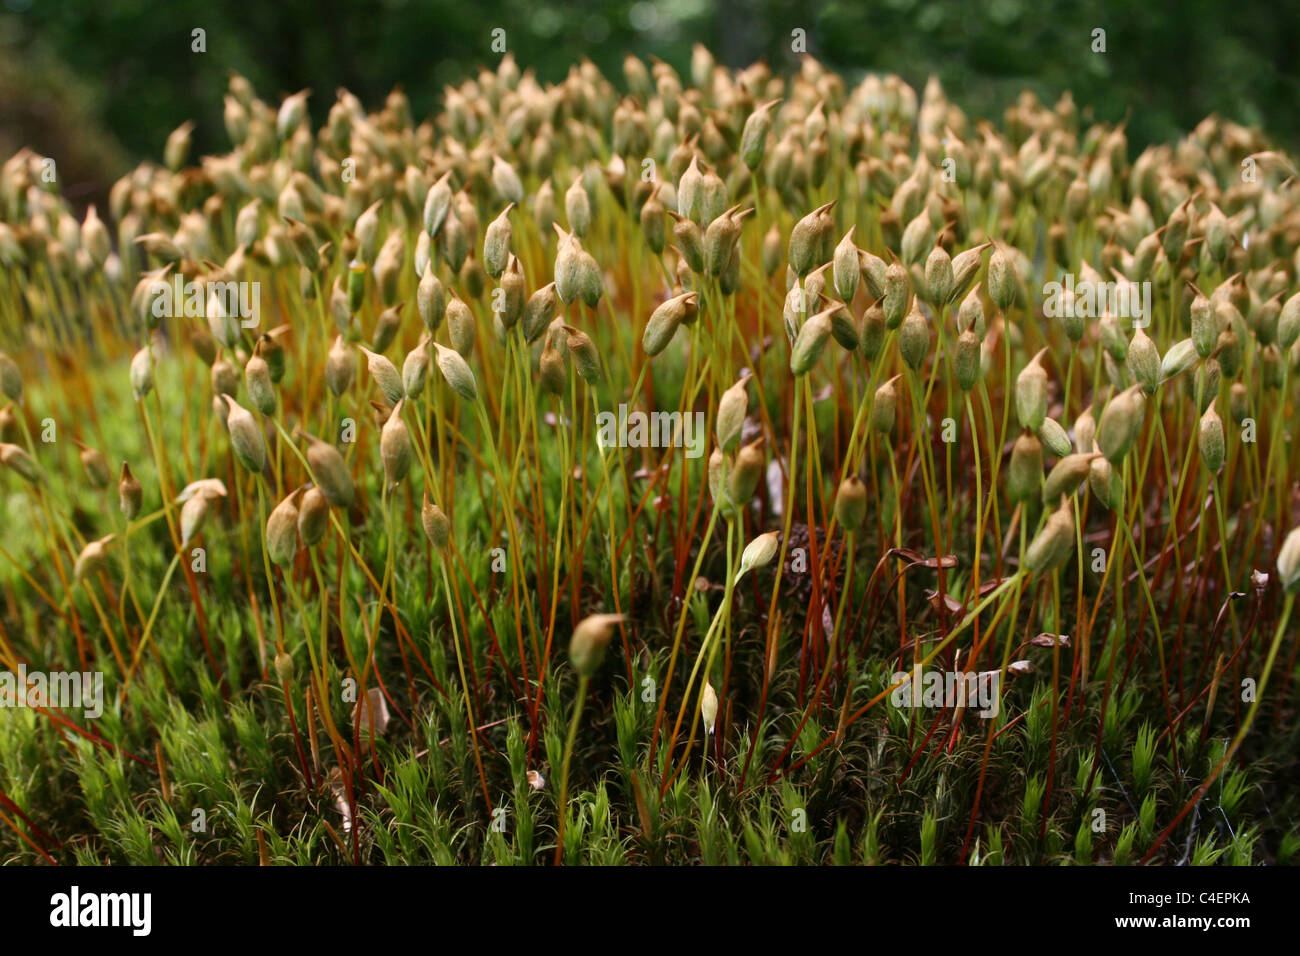 Moss Showing Reproductive Sporophytes Taken In Cumbria, UK Stock Photo